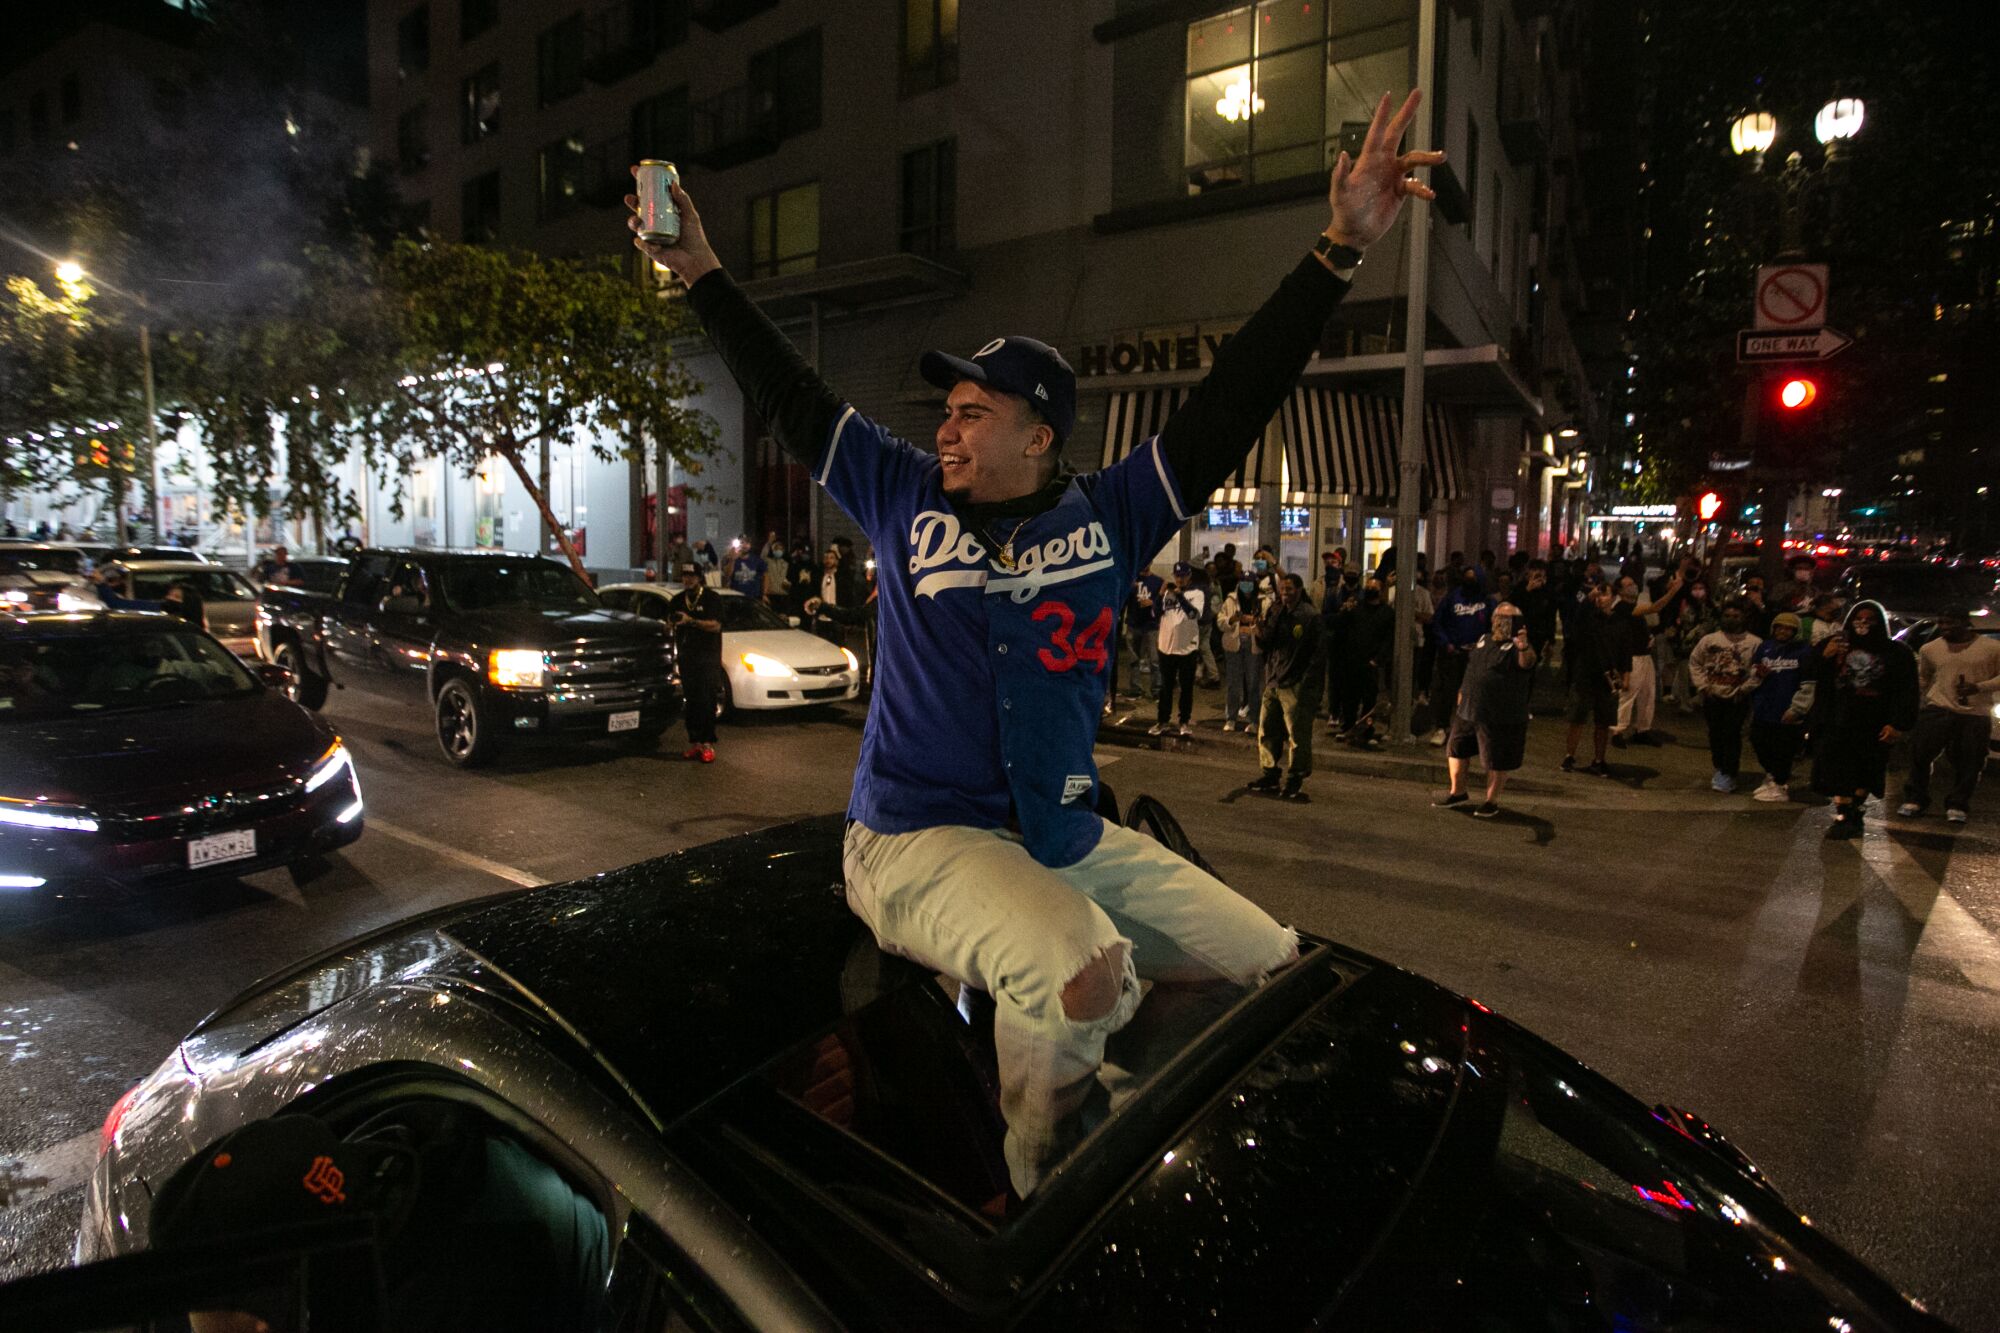 A Dodgers fan rides atop a moving car, arms raised, on a street.